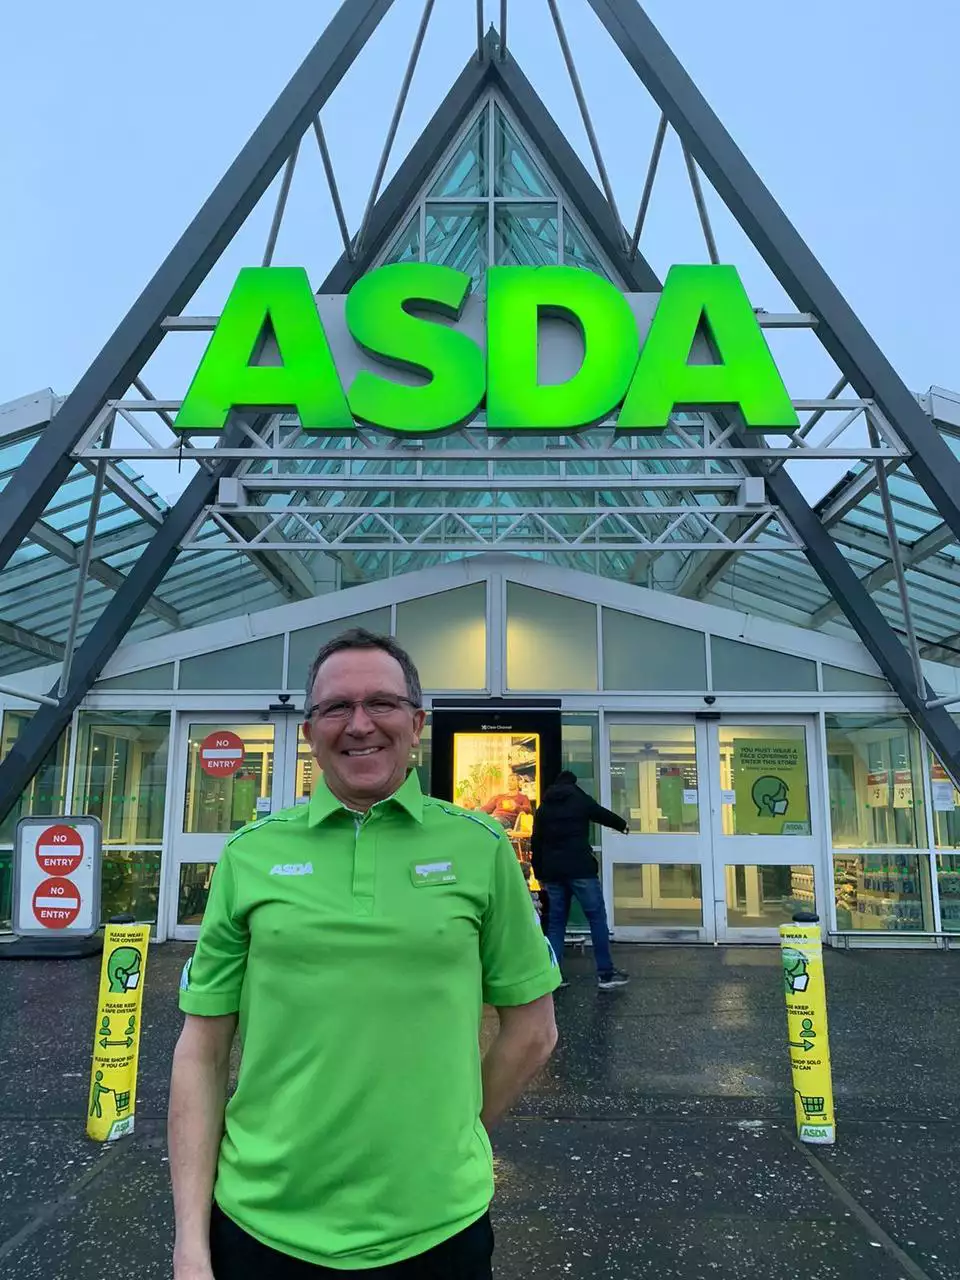  George Costello from Asda Dunfermline ran two marathons in 48 hours to raise money for the local foodbank